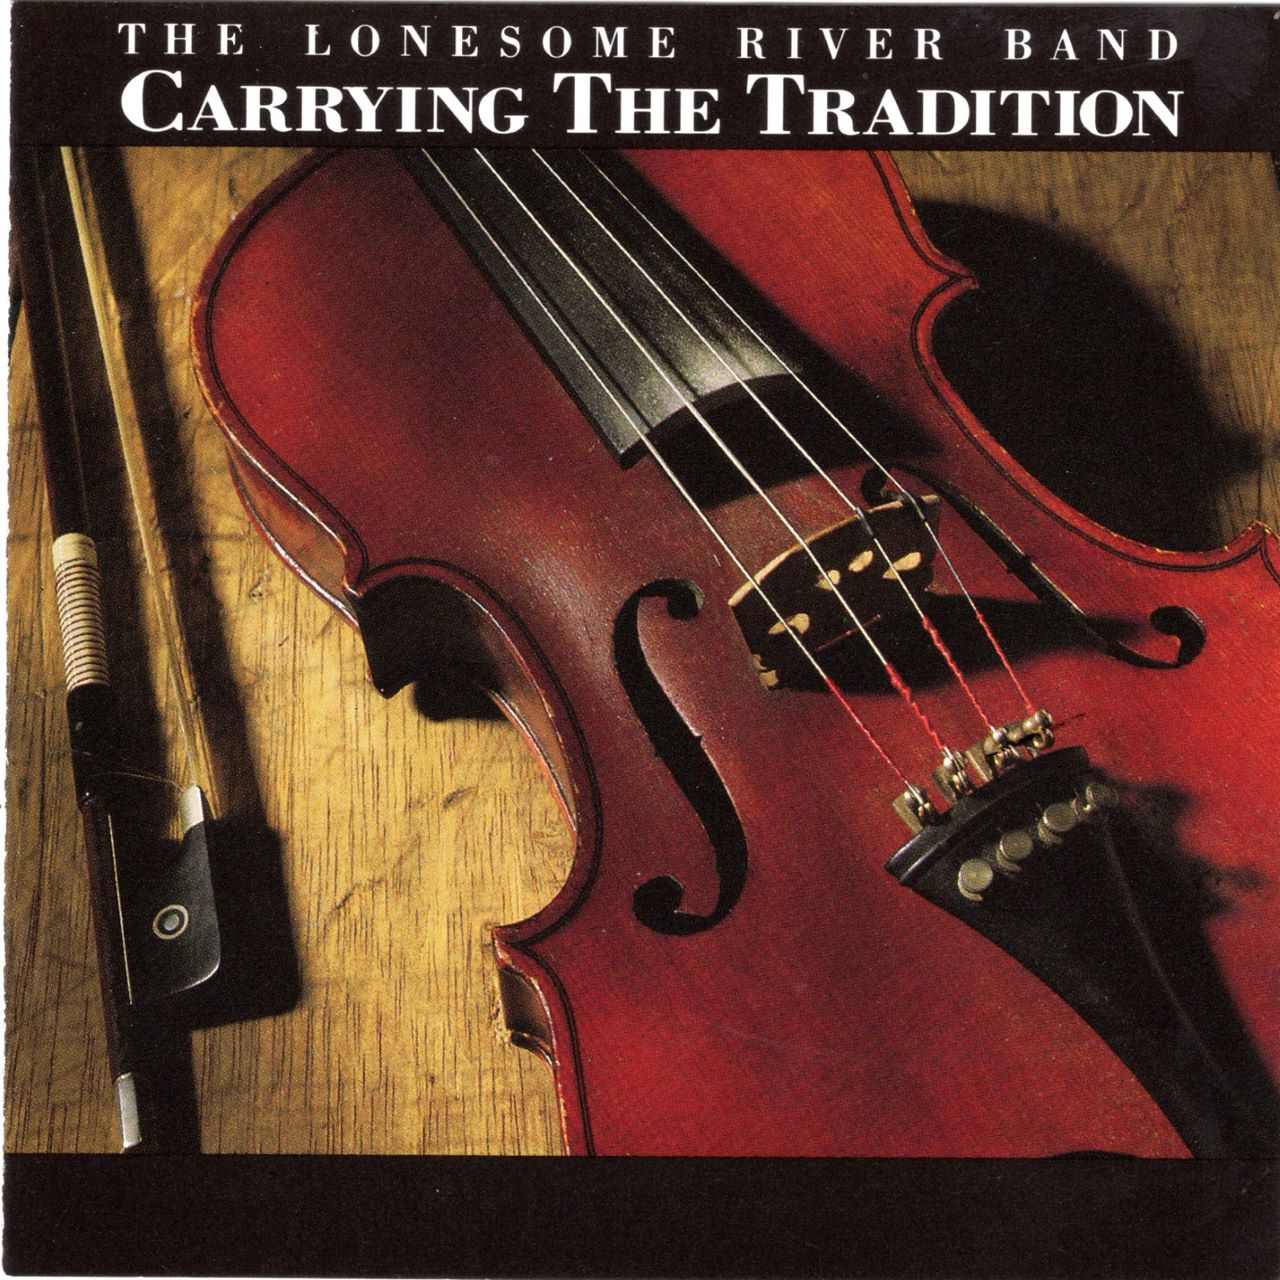 Lonesome River Band - Carrying The Tradition cover album